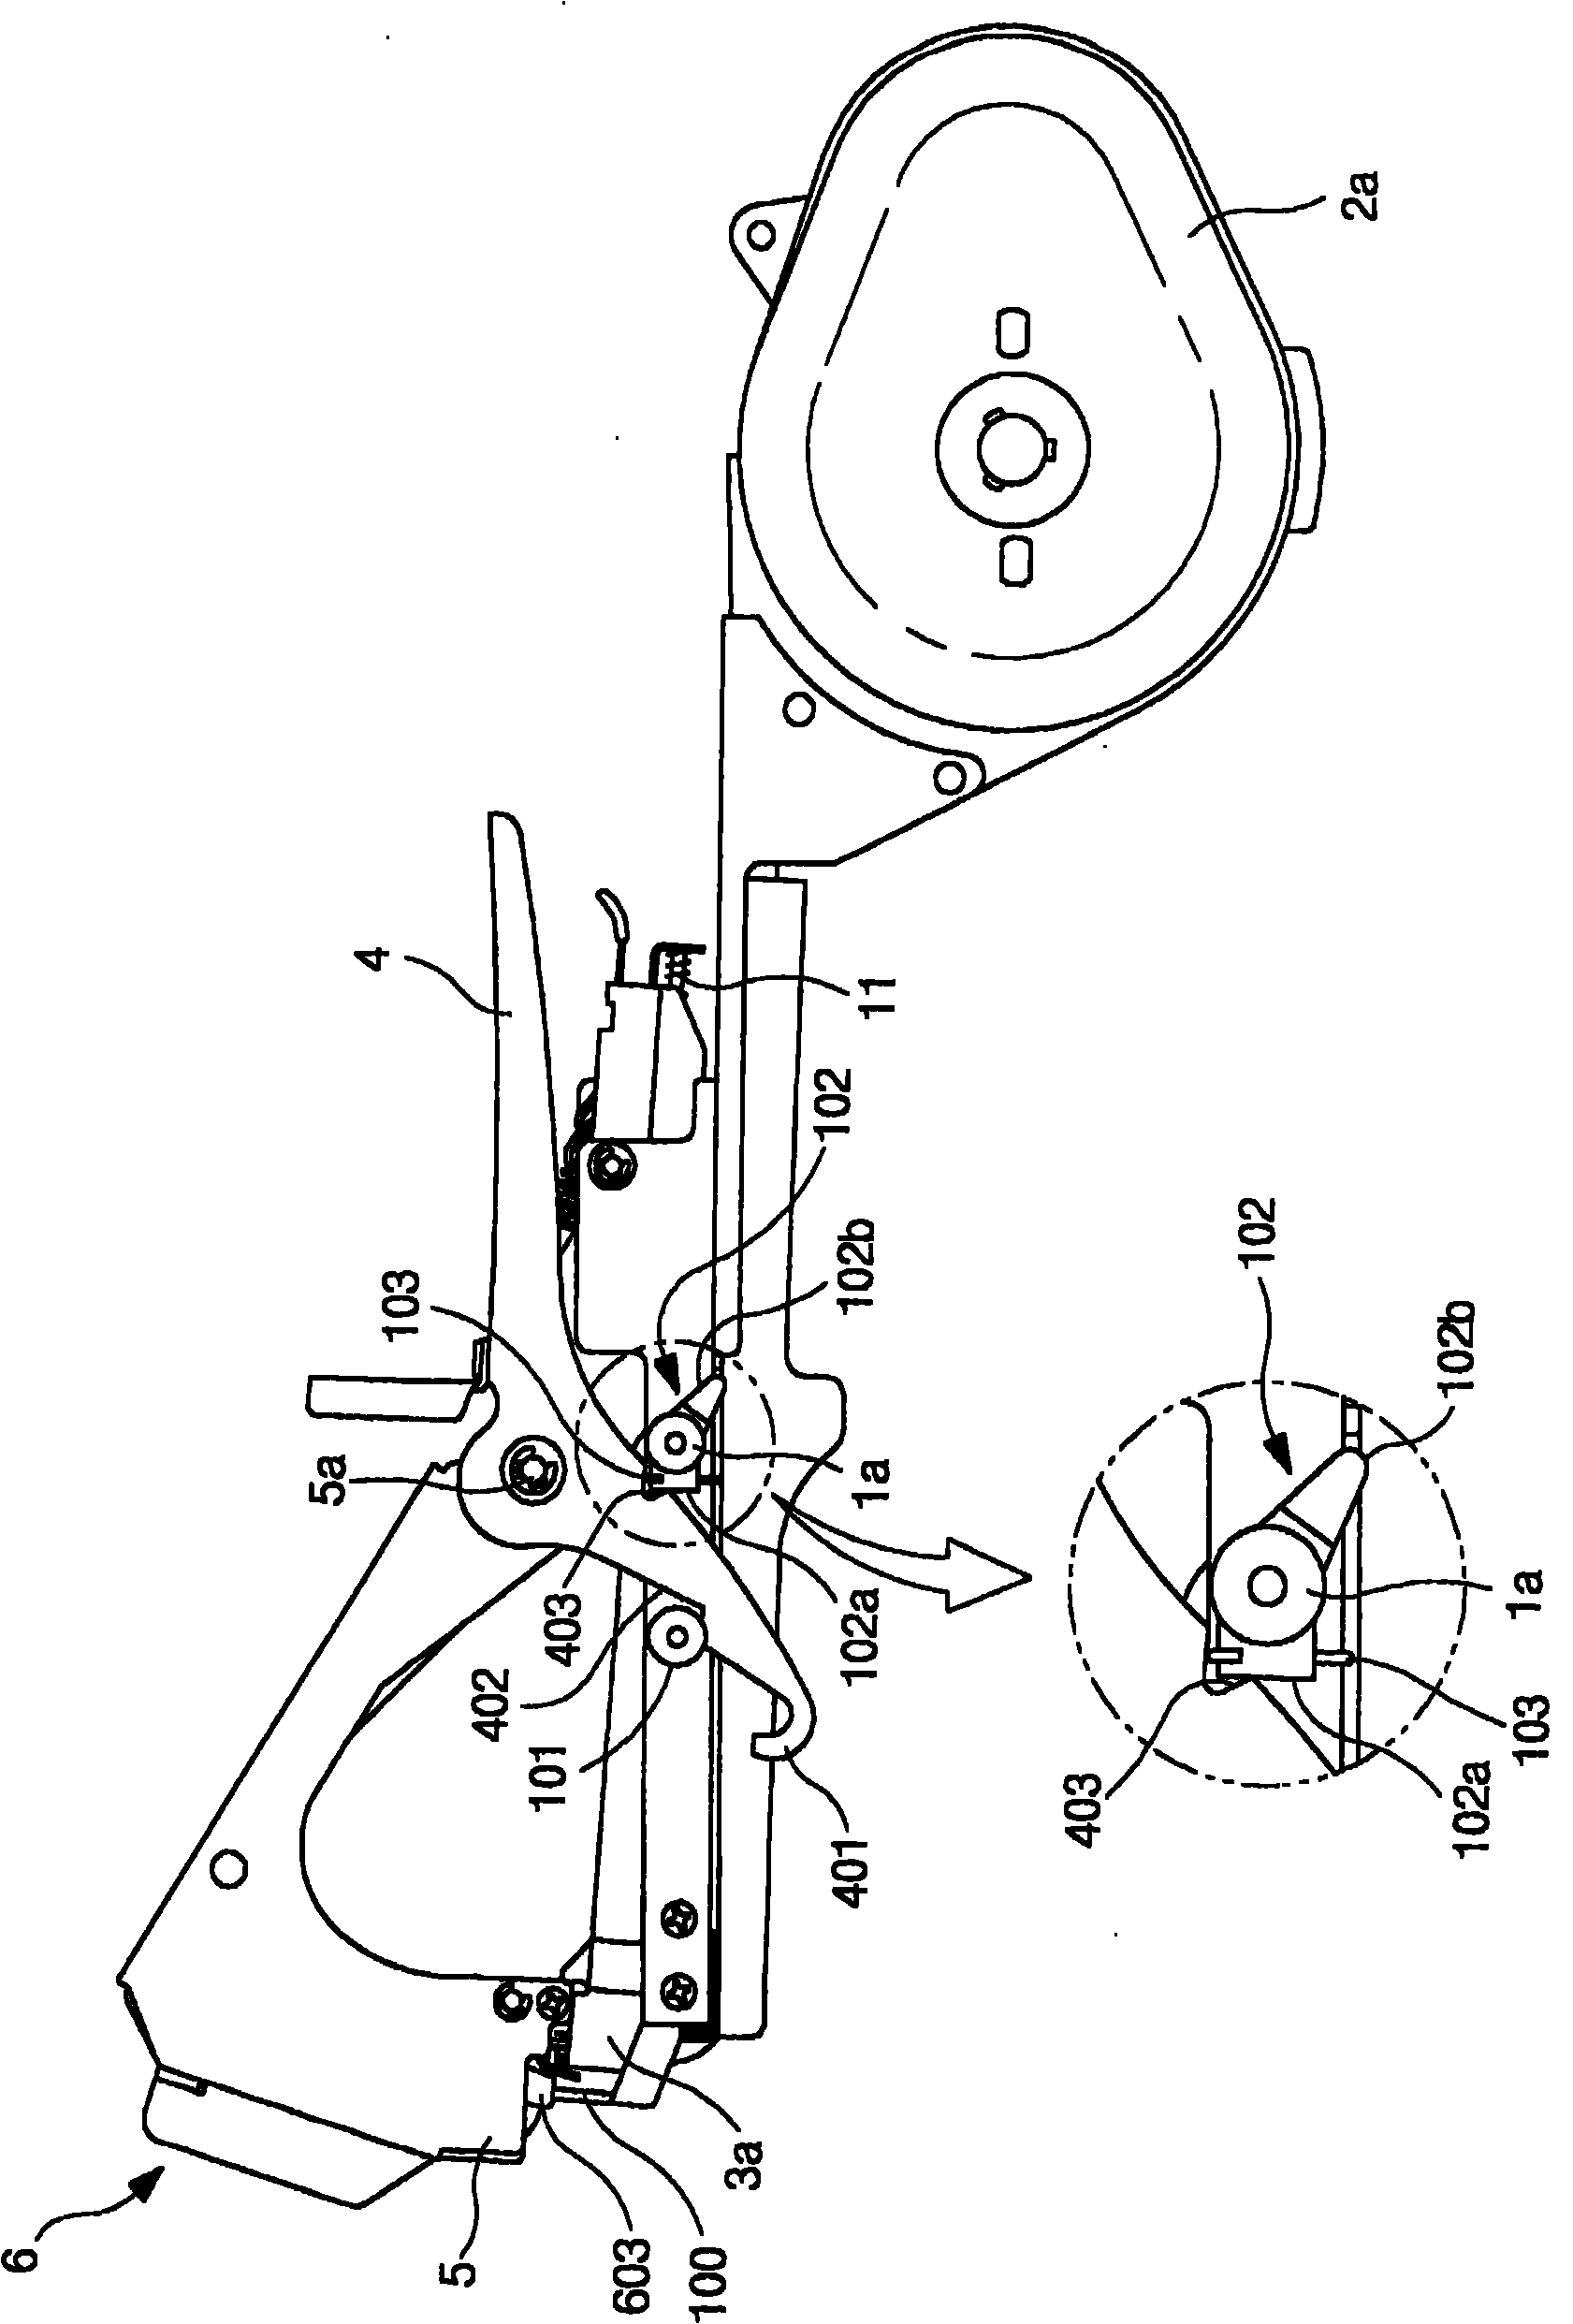 Agricultural binding device